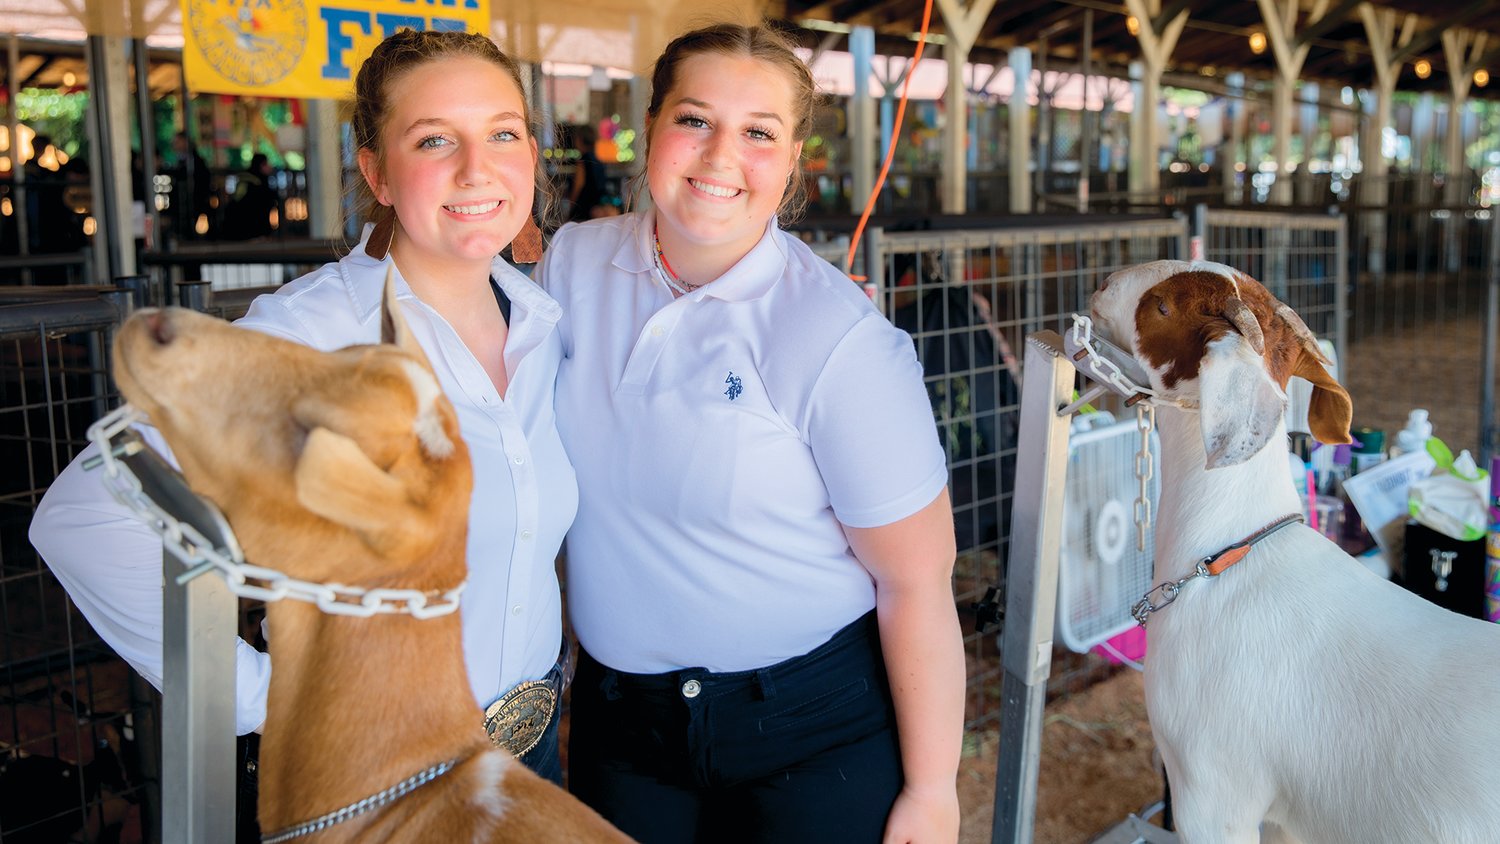 Callie Thomas and Clara Price, of Chehalis, smile for a photo with goats Lani and Charlie at the Thurston County Fair on Thursday, July 28.